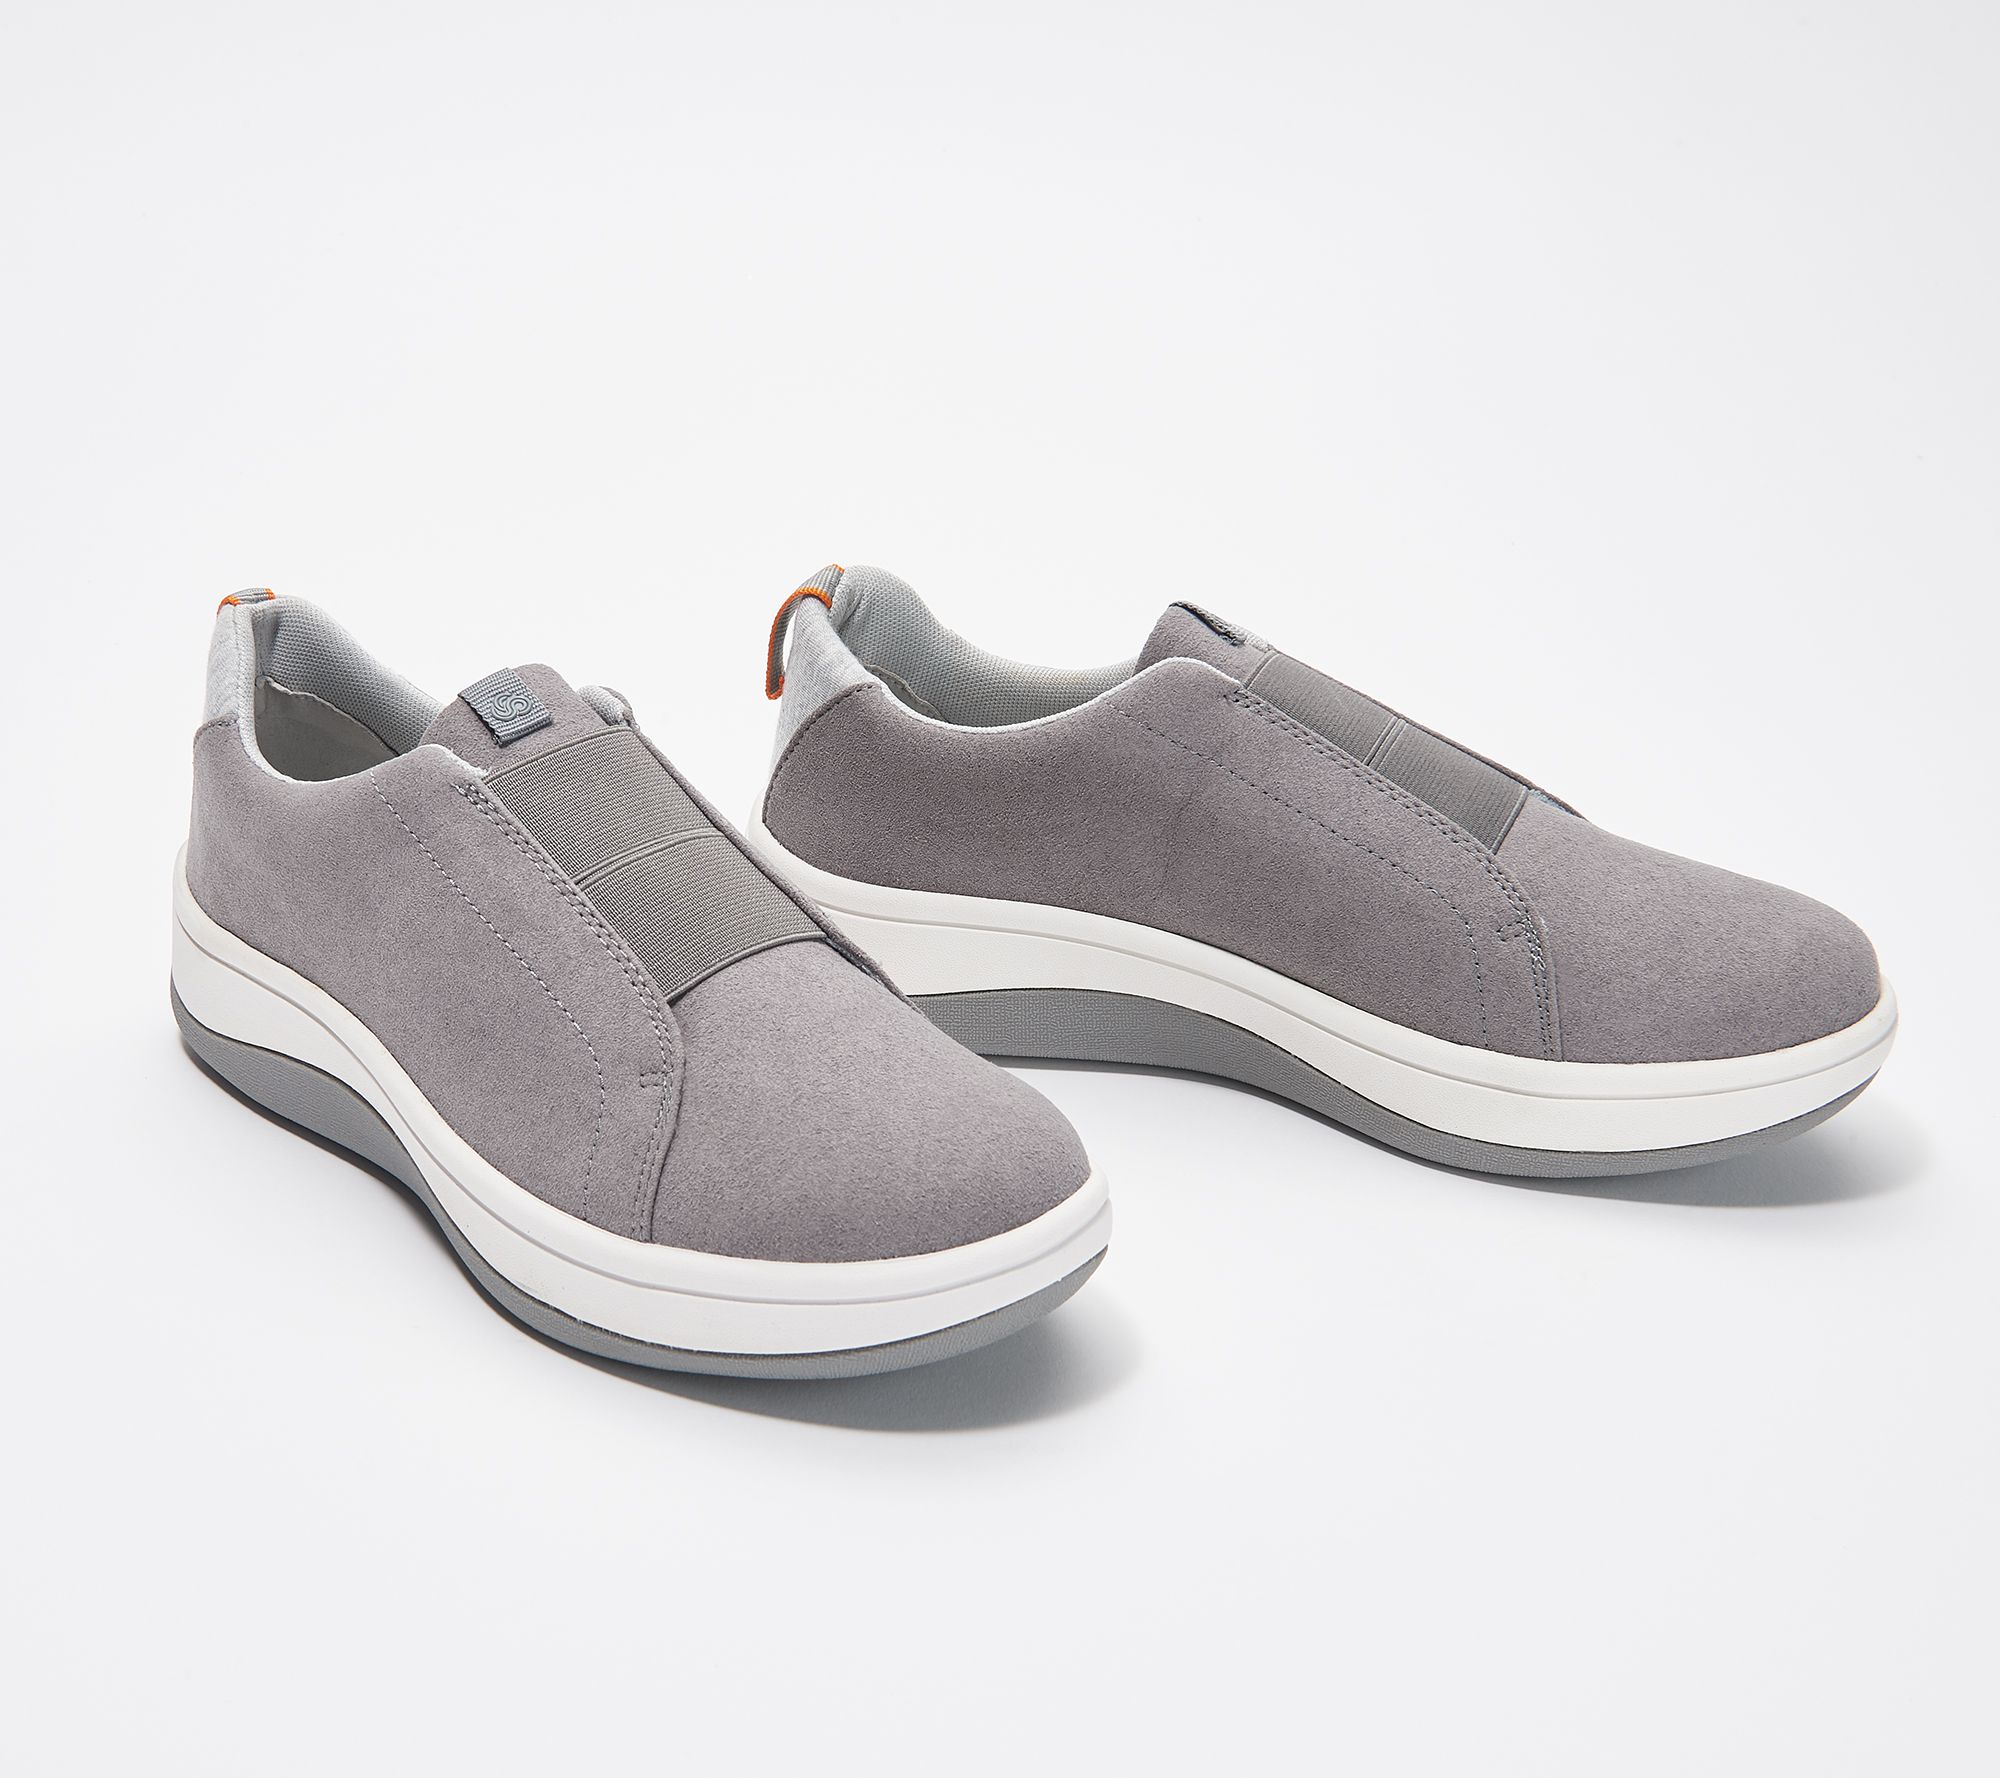 cloudsteppers by clarks shoes 